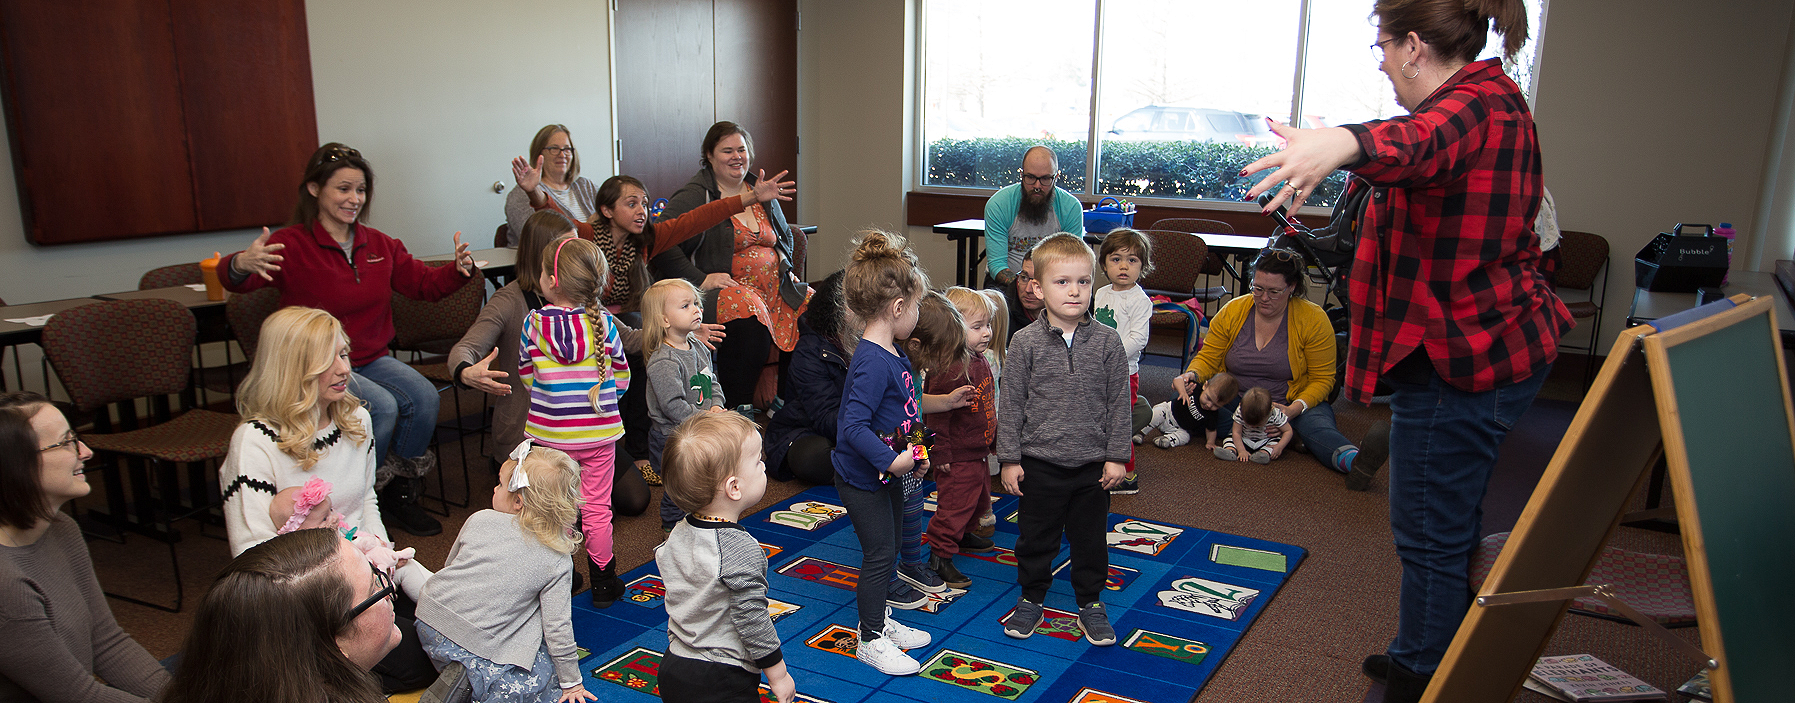 Librarian standing in front of the children with arms spread wide during storytime at Miller Branch